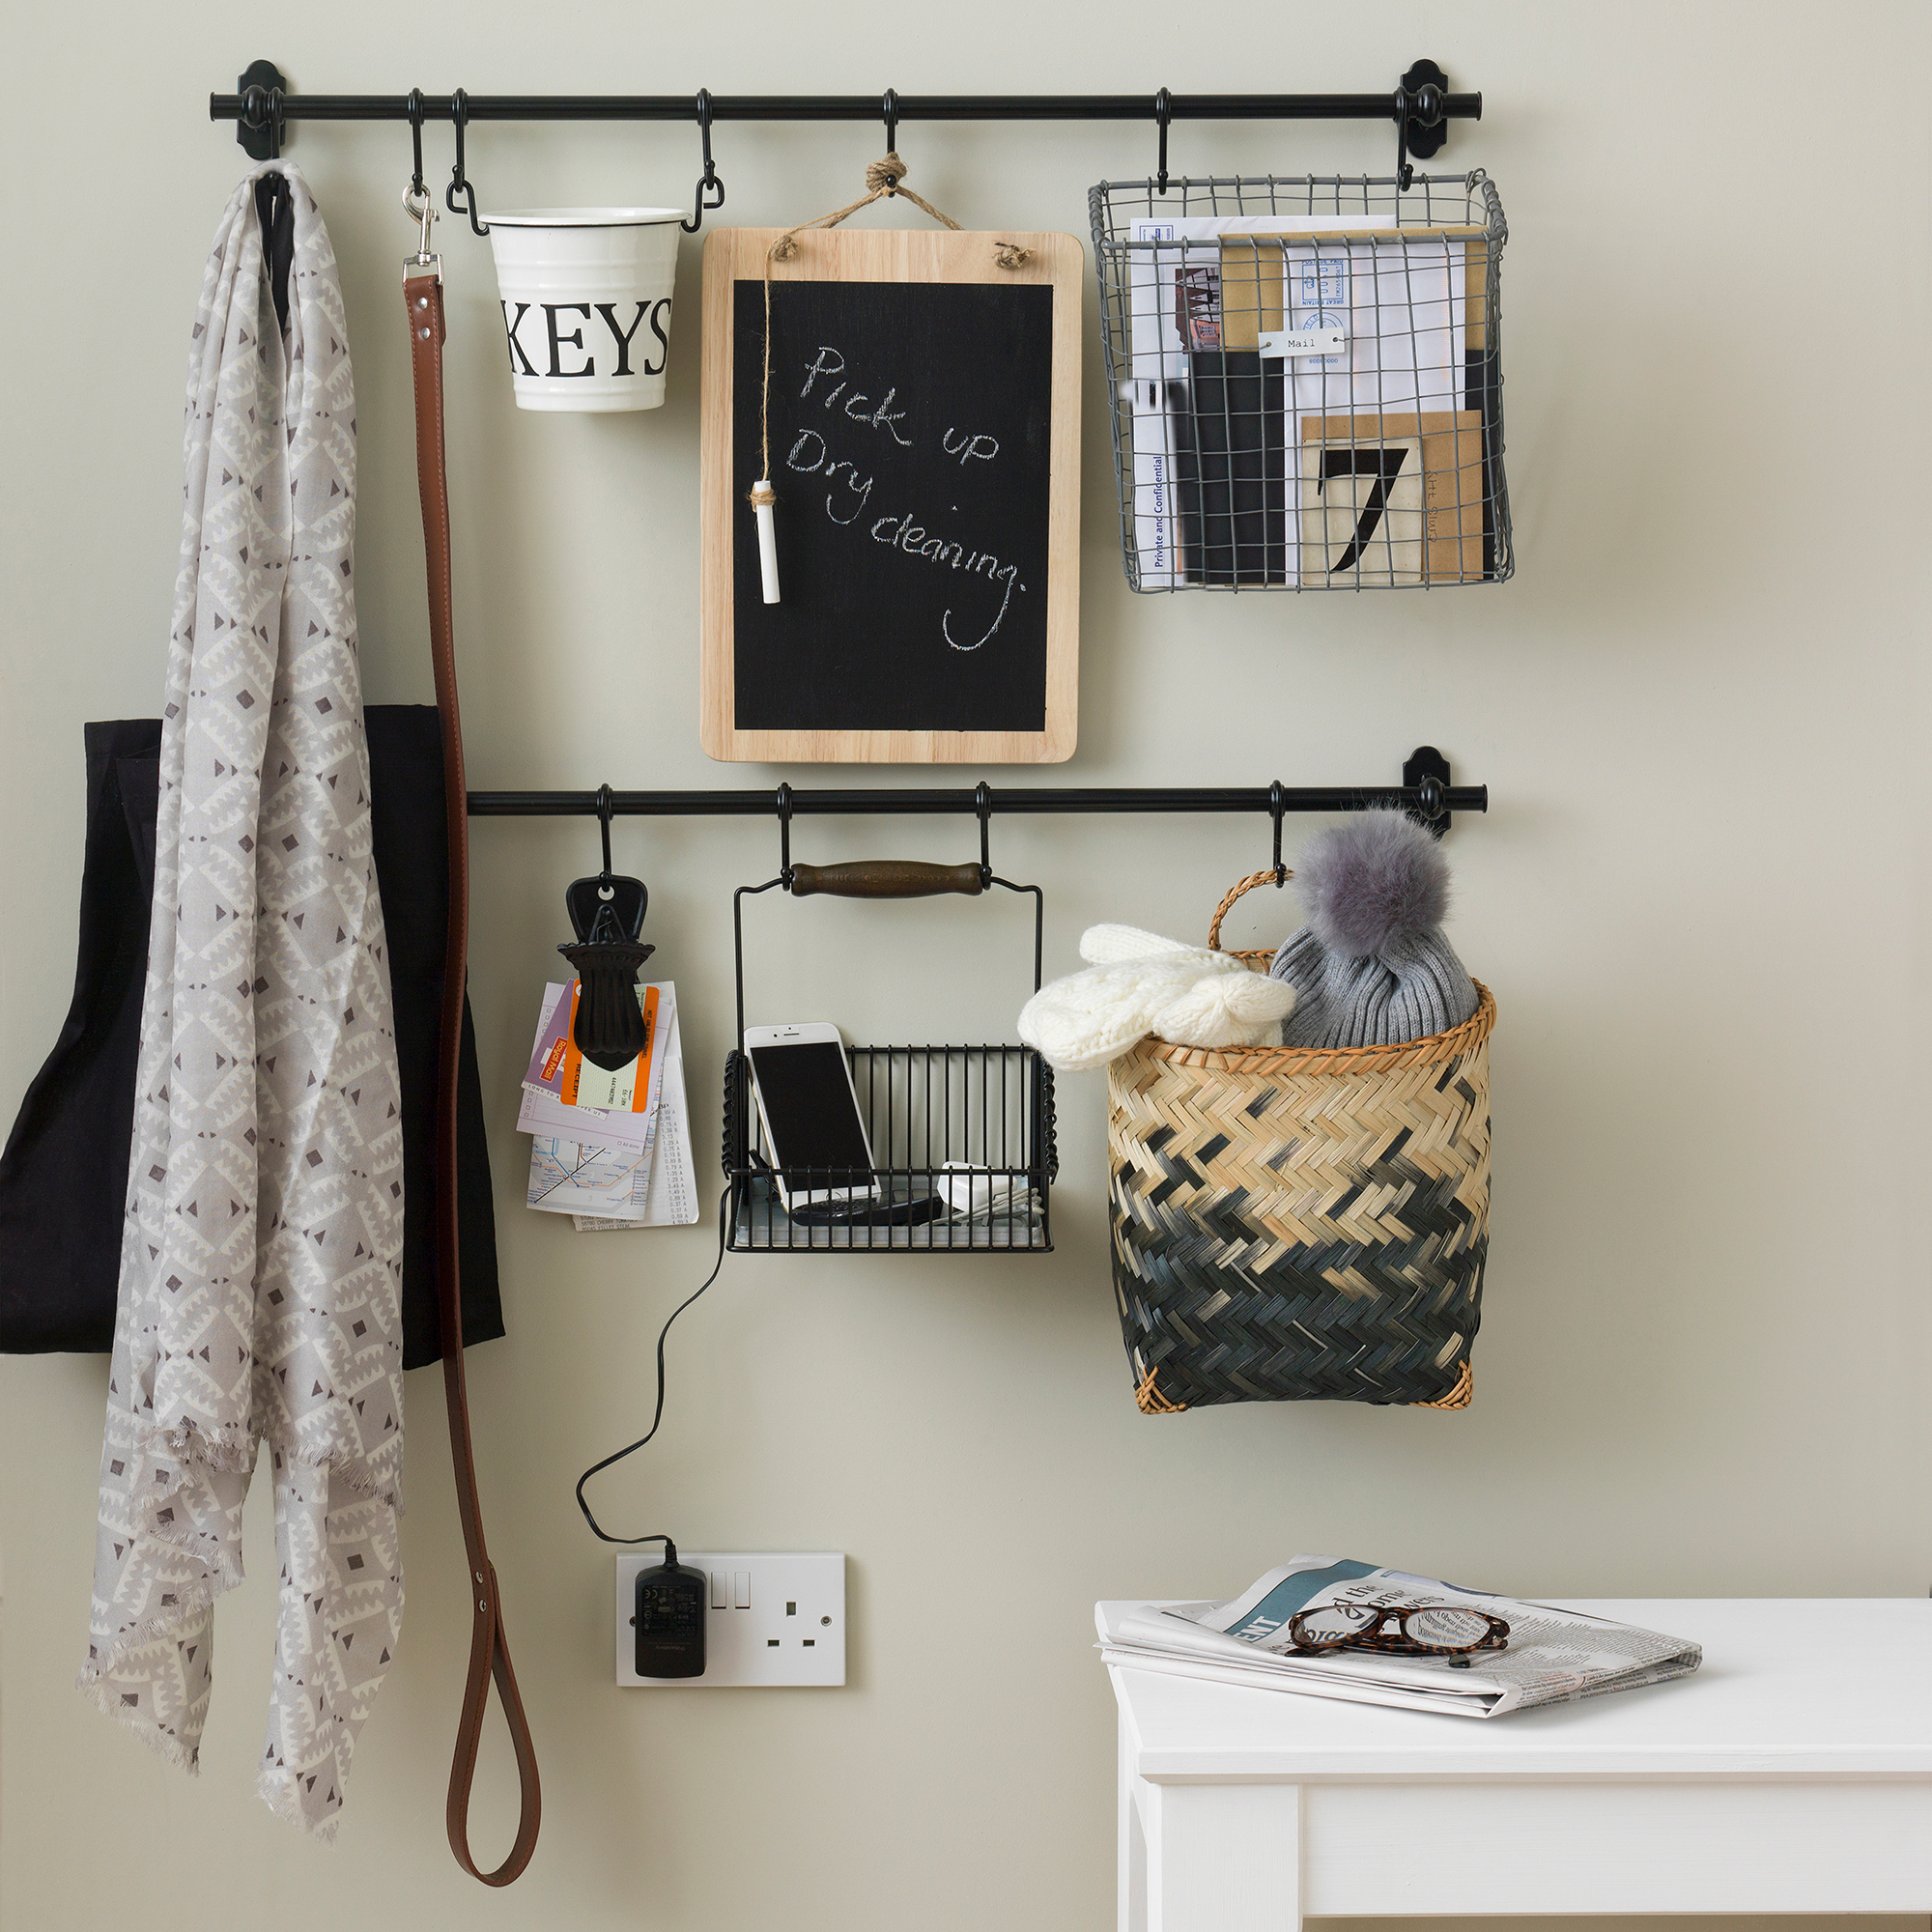 Black hanging rails used to hang kitchen items and baskets for organising